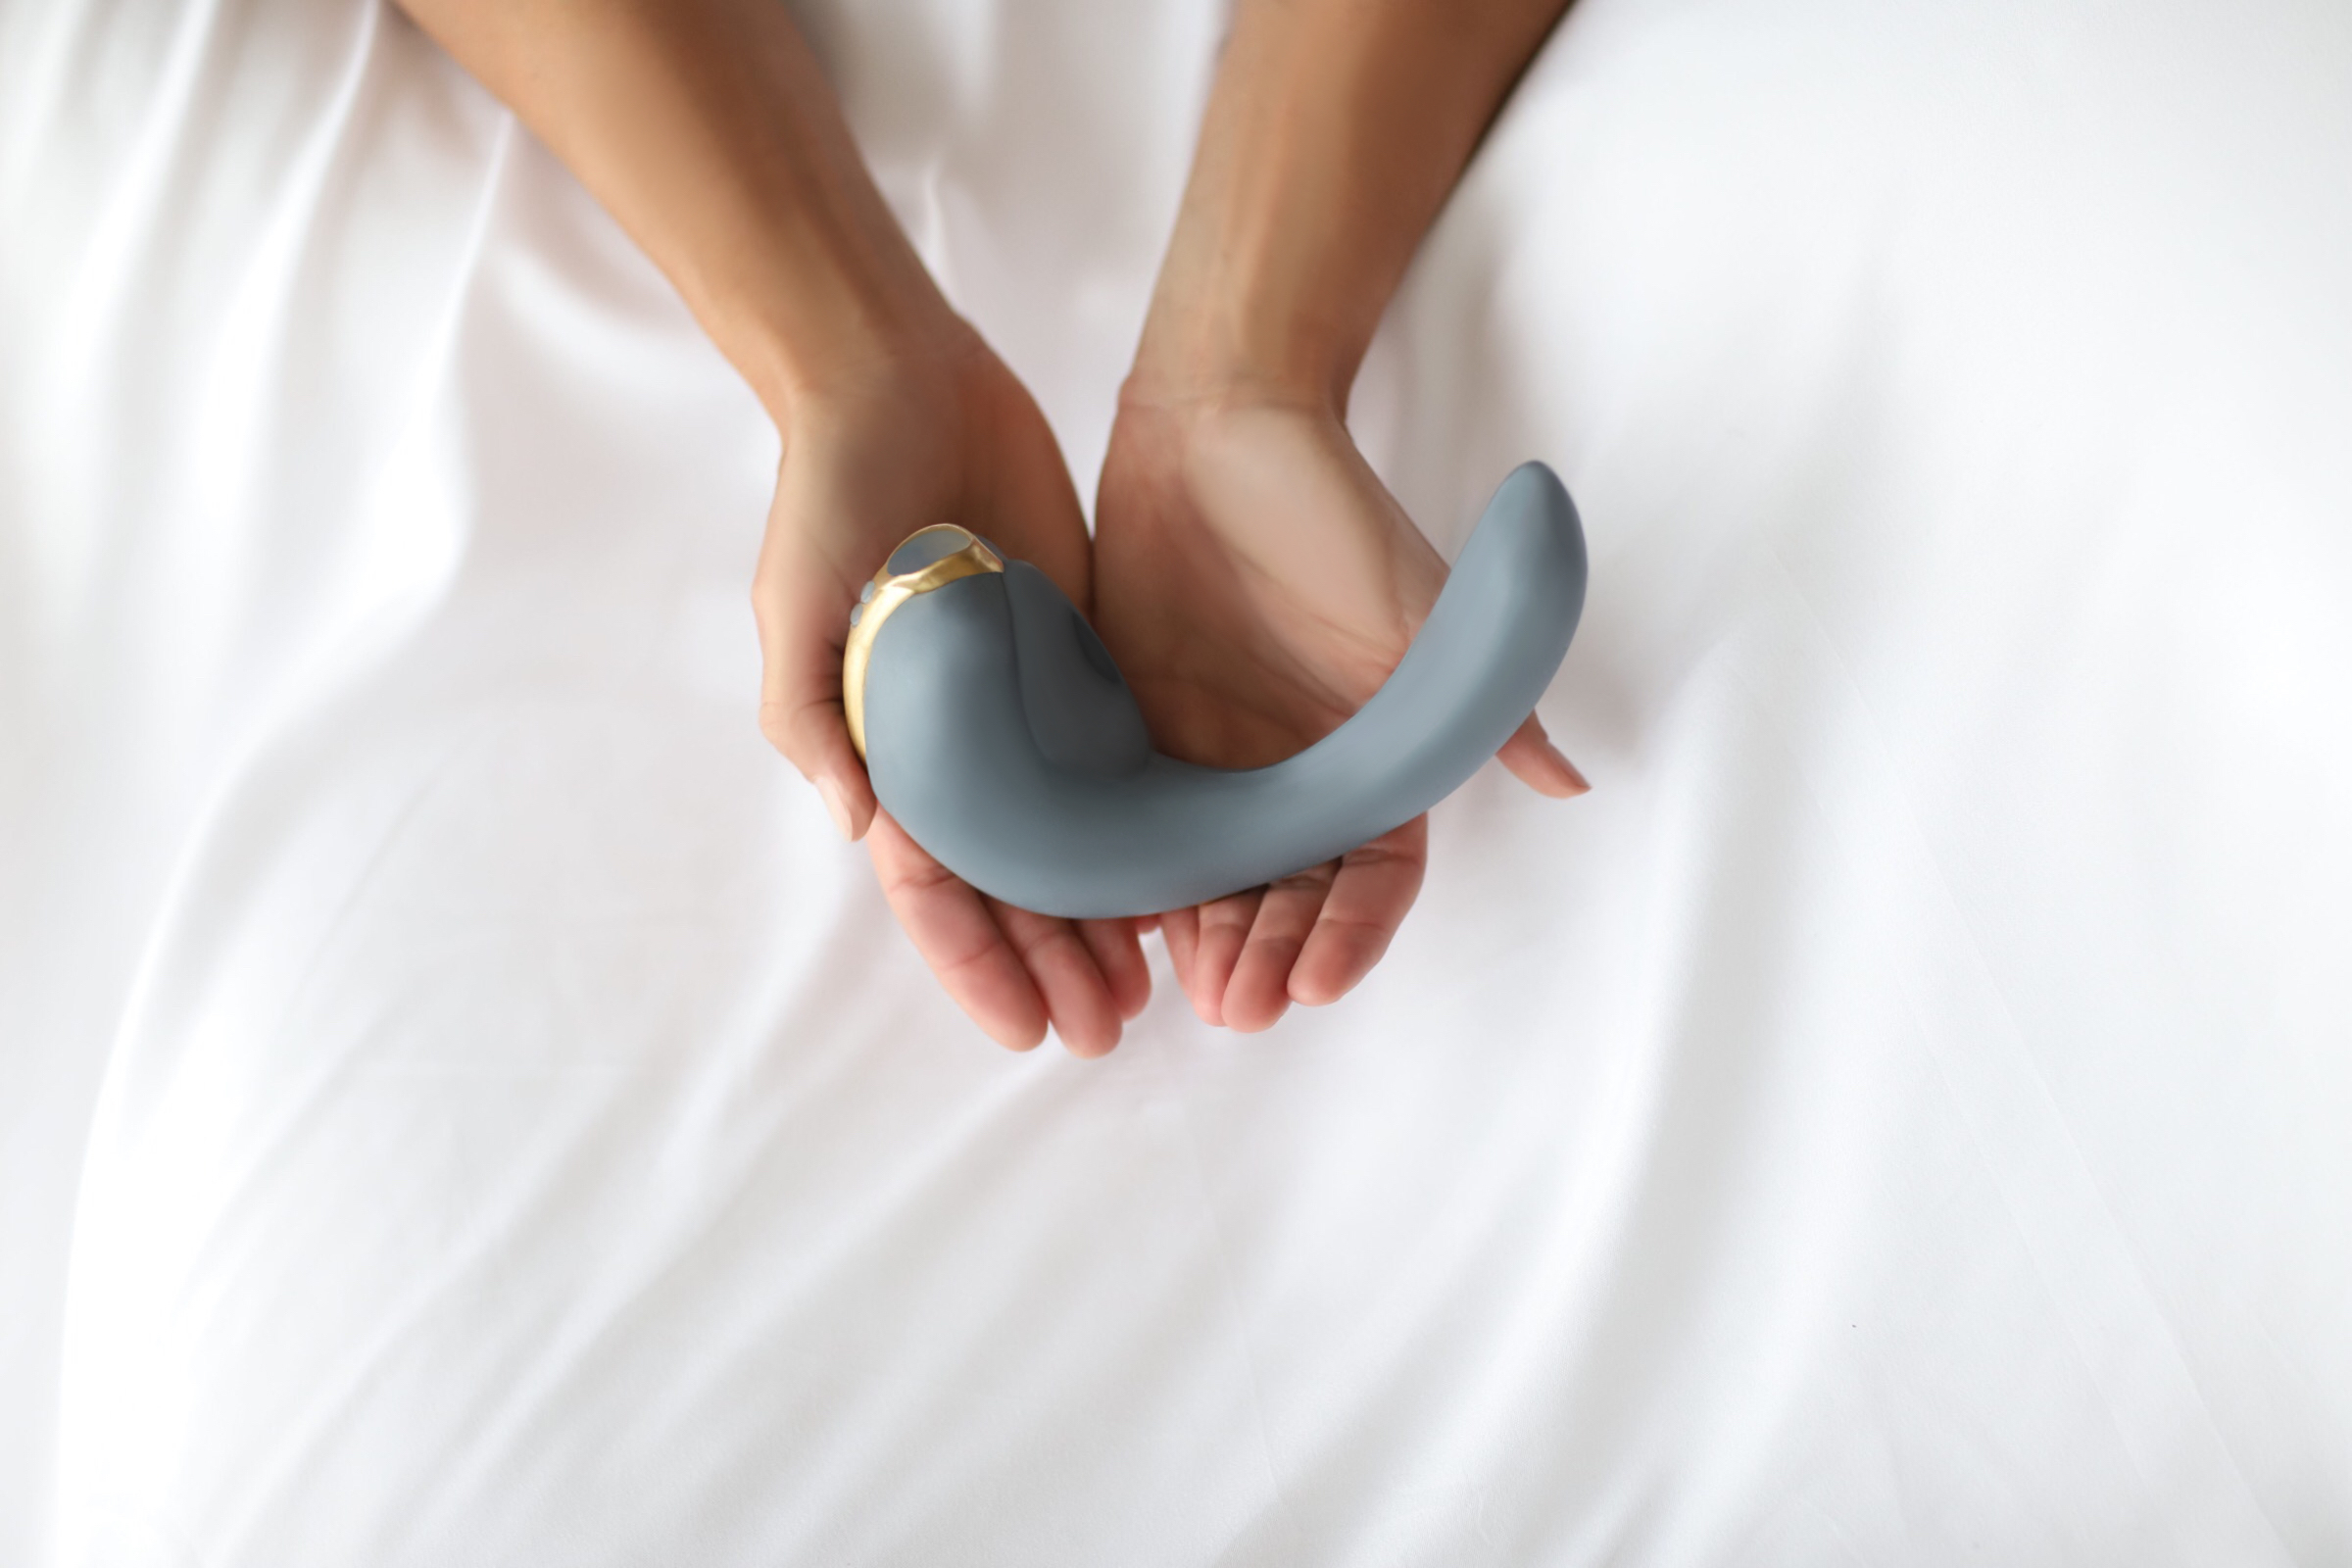 Sex toy debacle reveals shameful double standard at CES